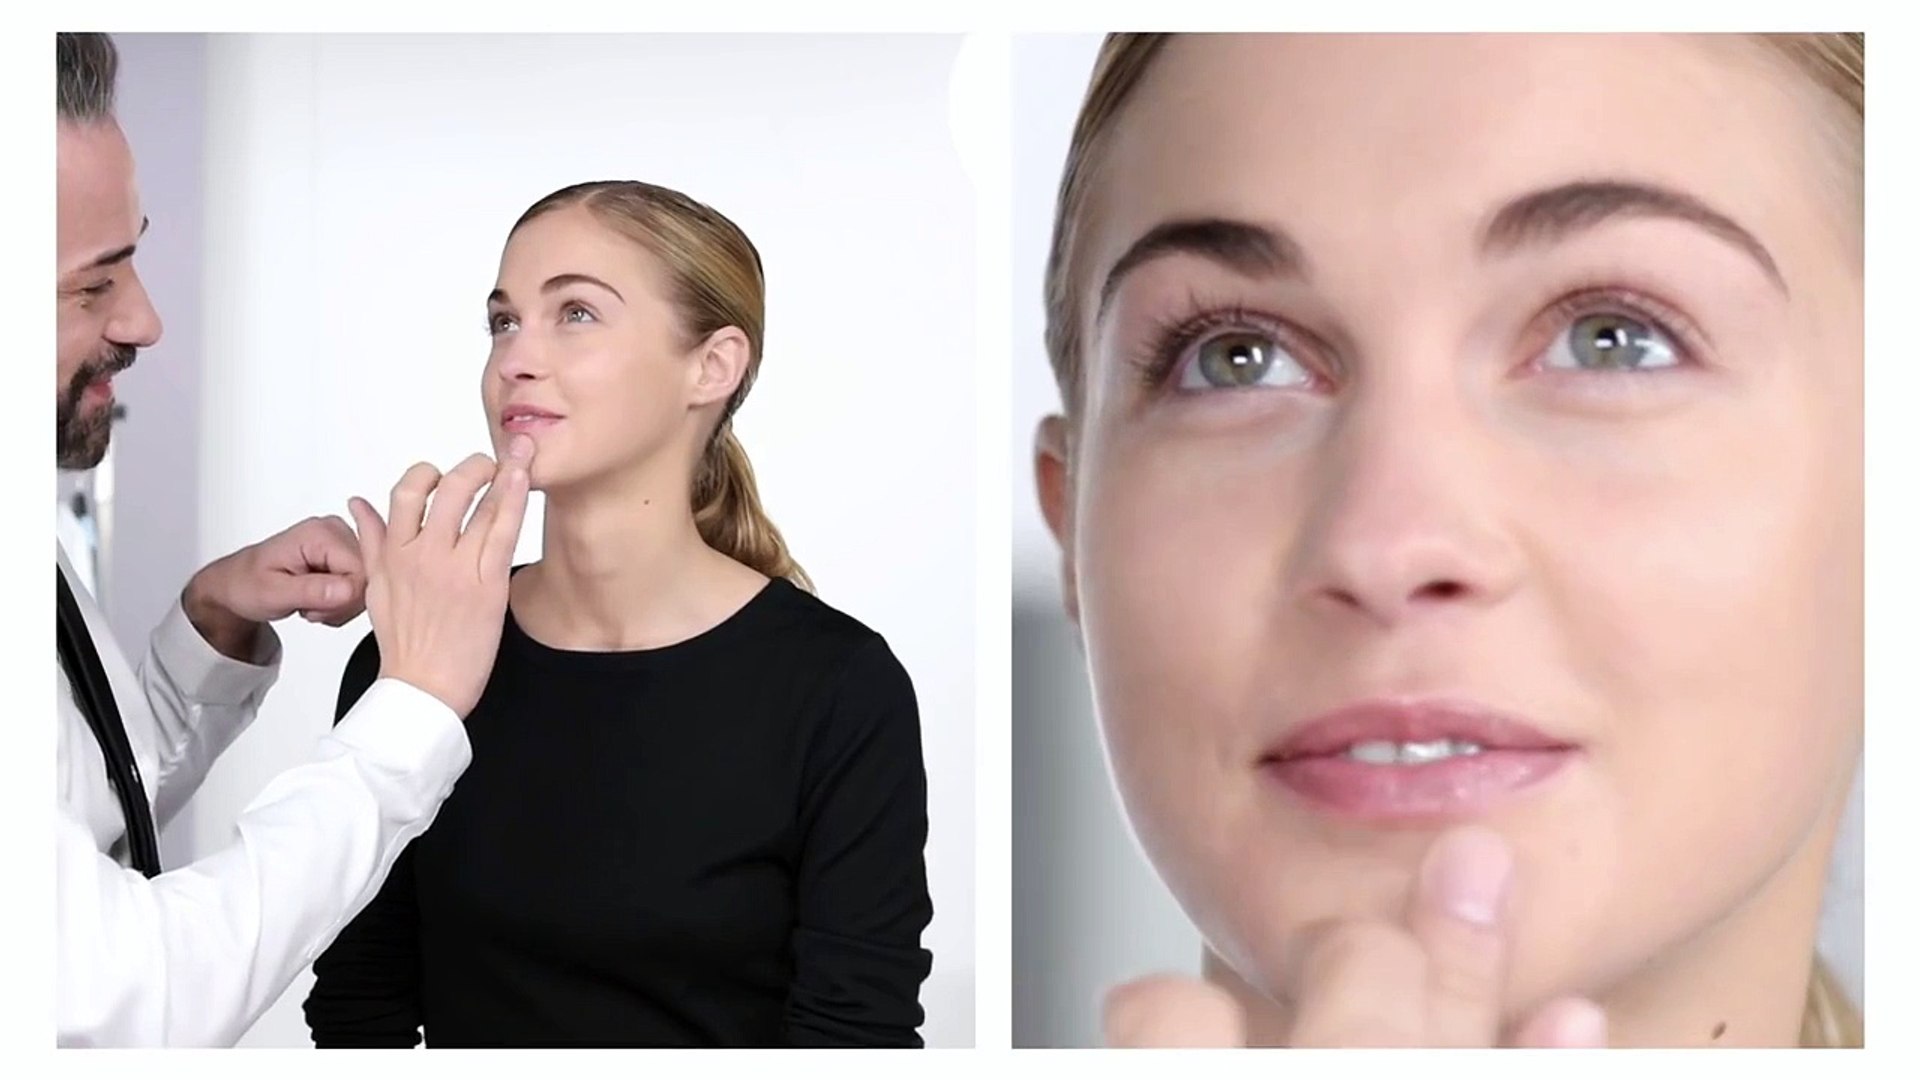 Dior How To: Tips for Flawless Foundation - Dailymotion